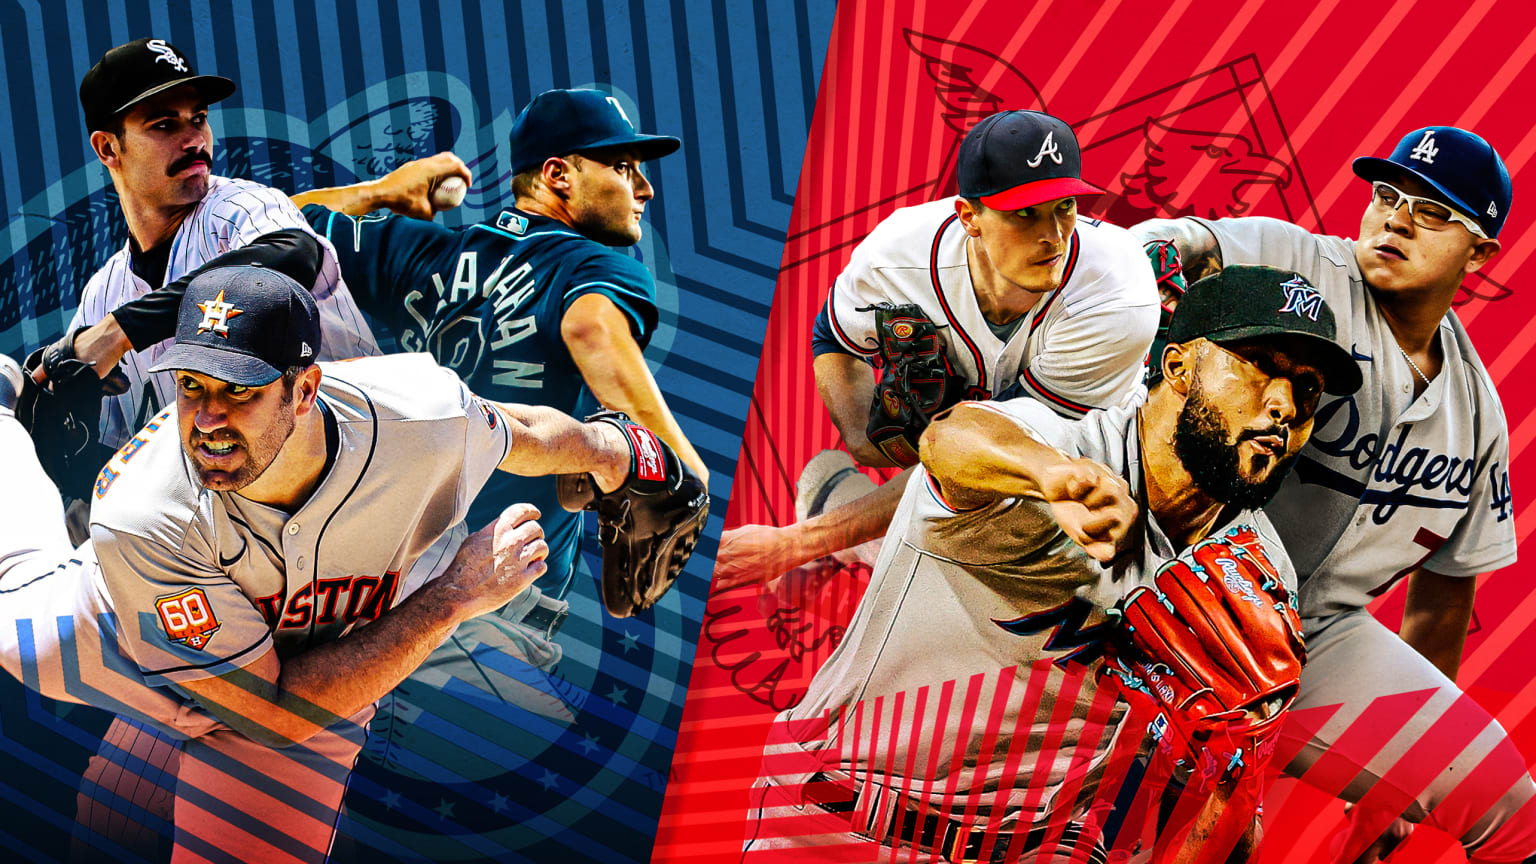 A split image showing three American League pitchers over a blue background on the left and three National League pitchers over a red background on the right